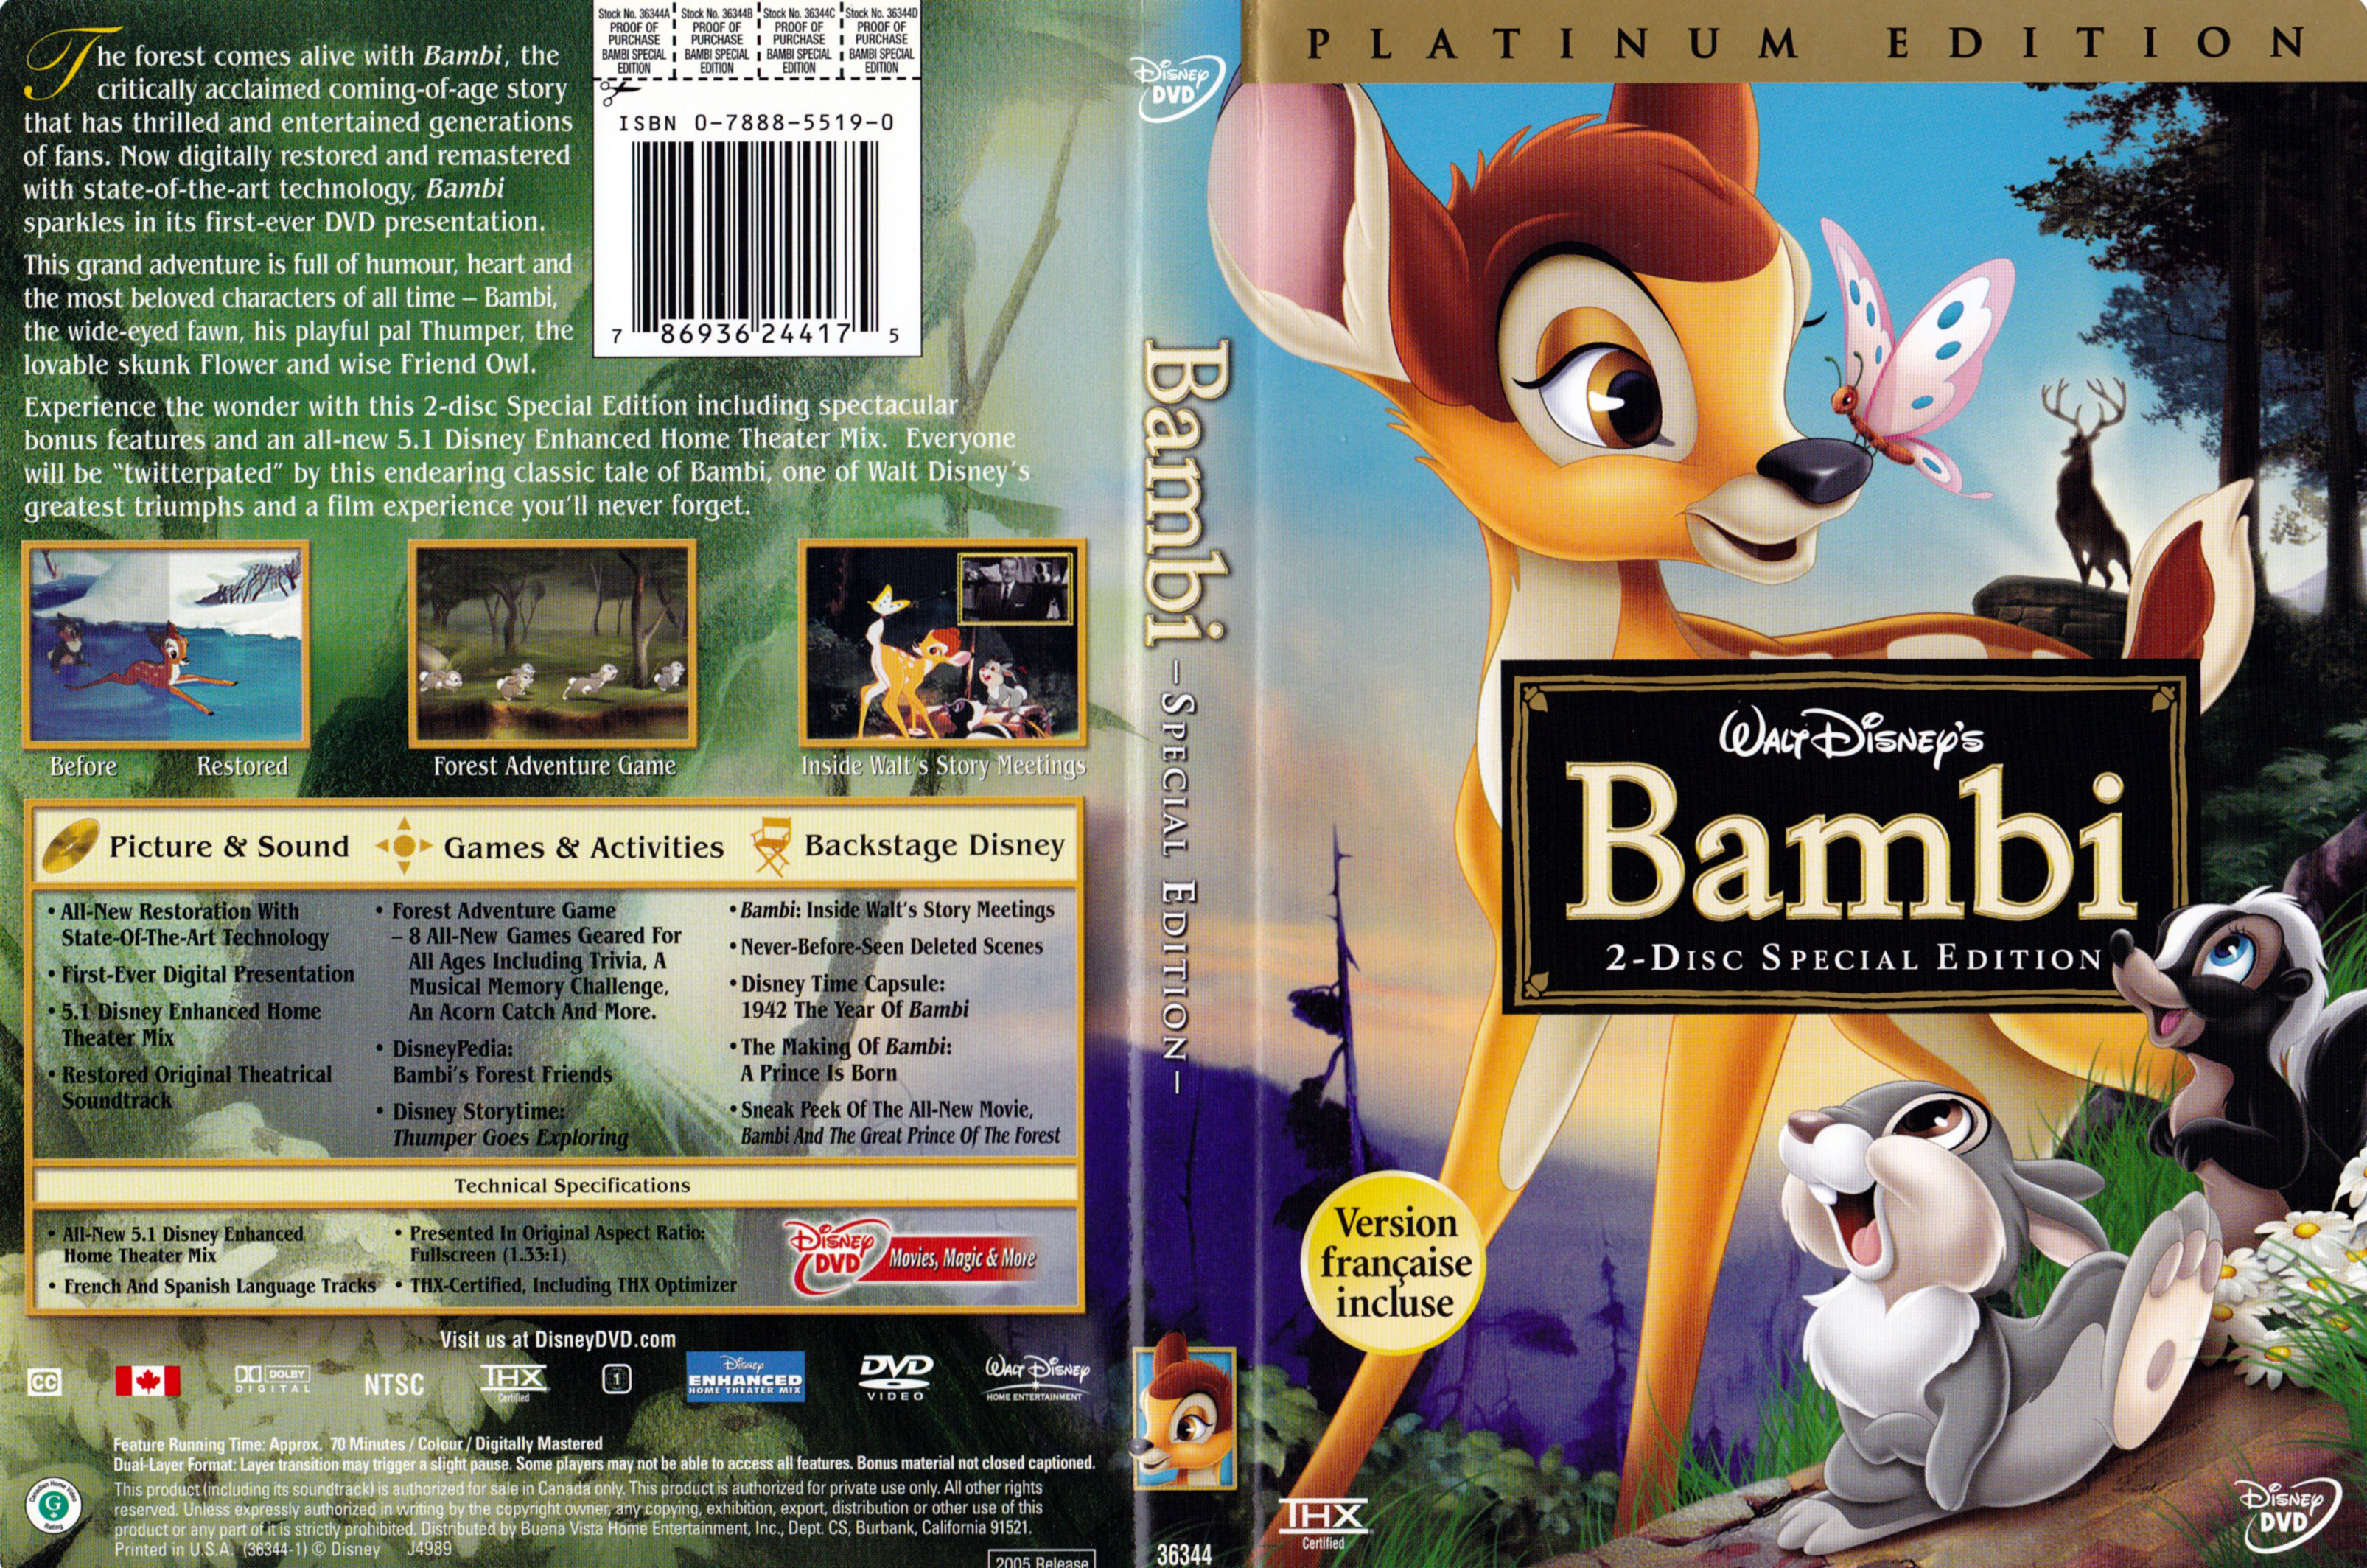 Jaquette DVD Bambi (Canadienne)